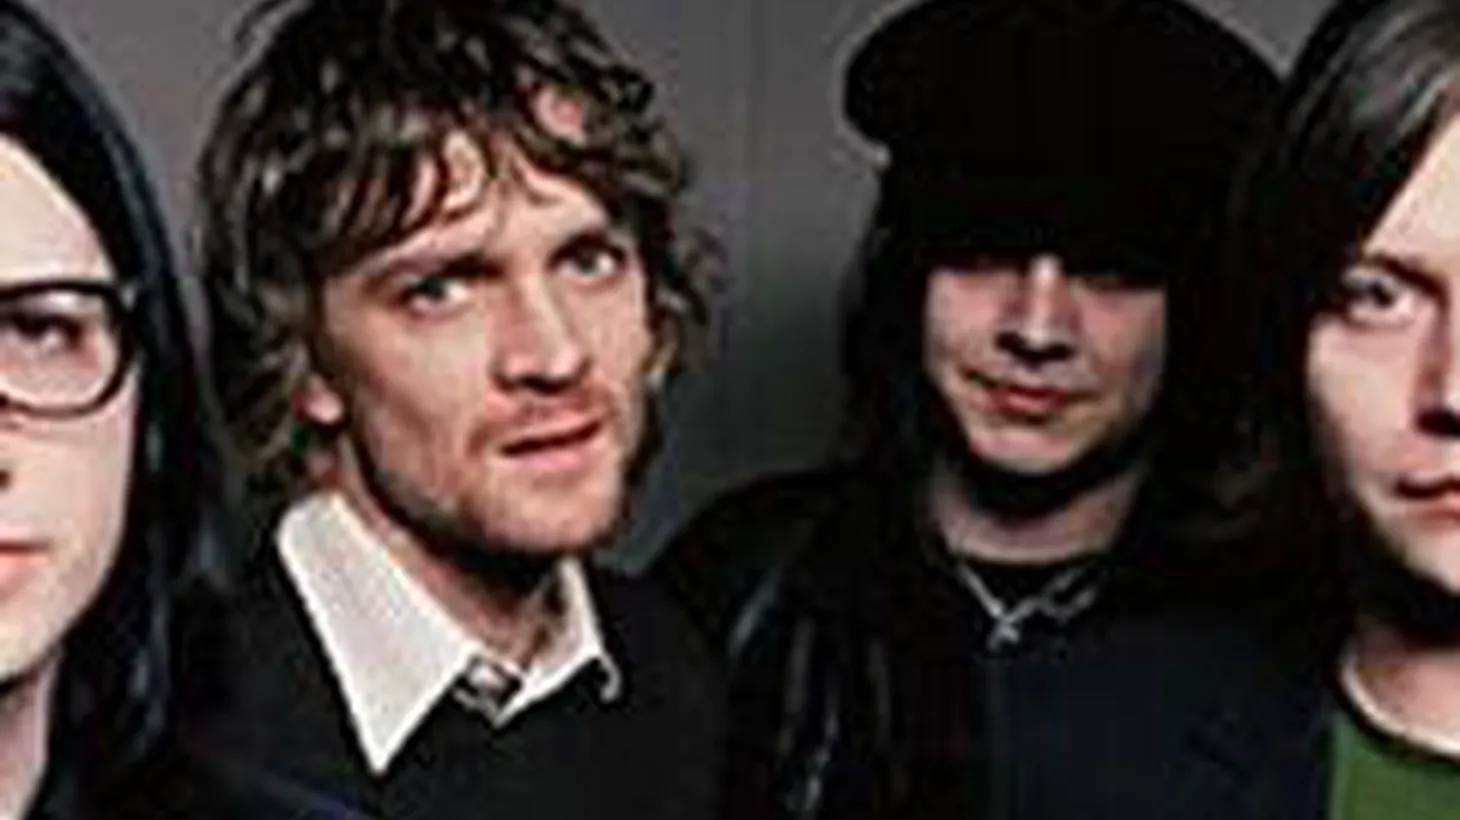 Brendan Benson and Jack White lead The Raconteurs in a live acoustic set on Morning Becomes Eclectic.